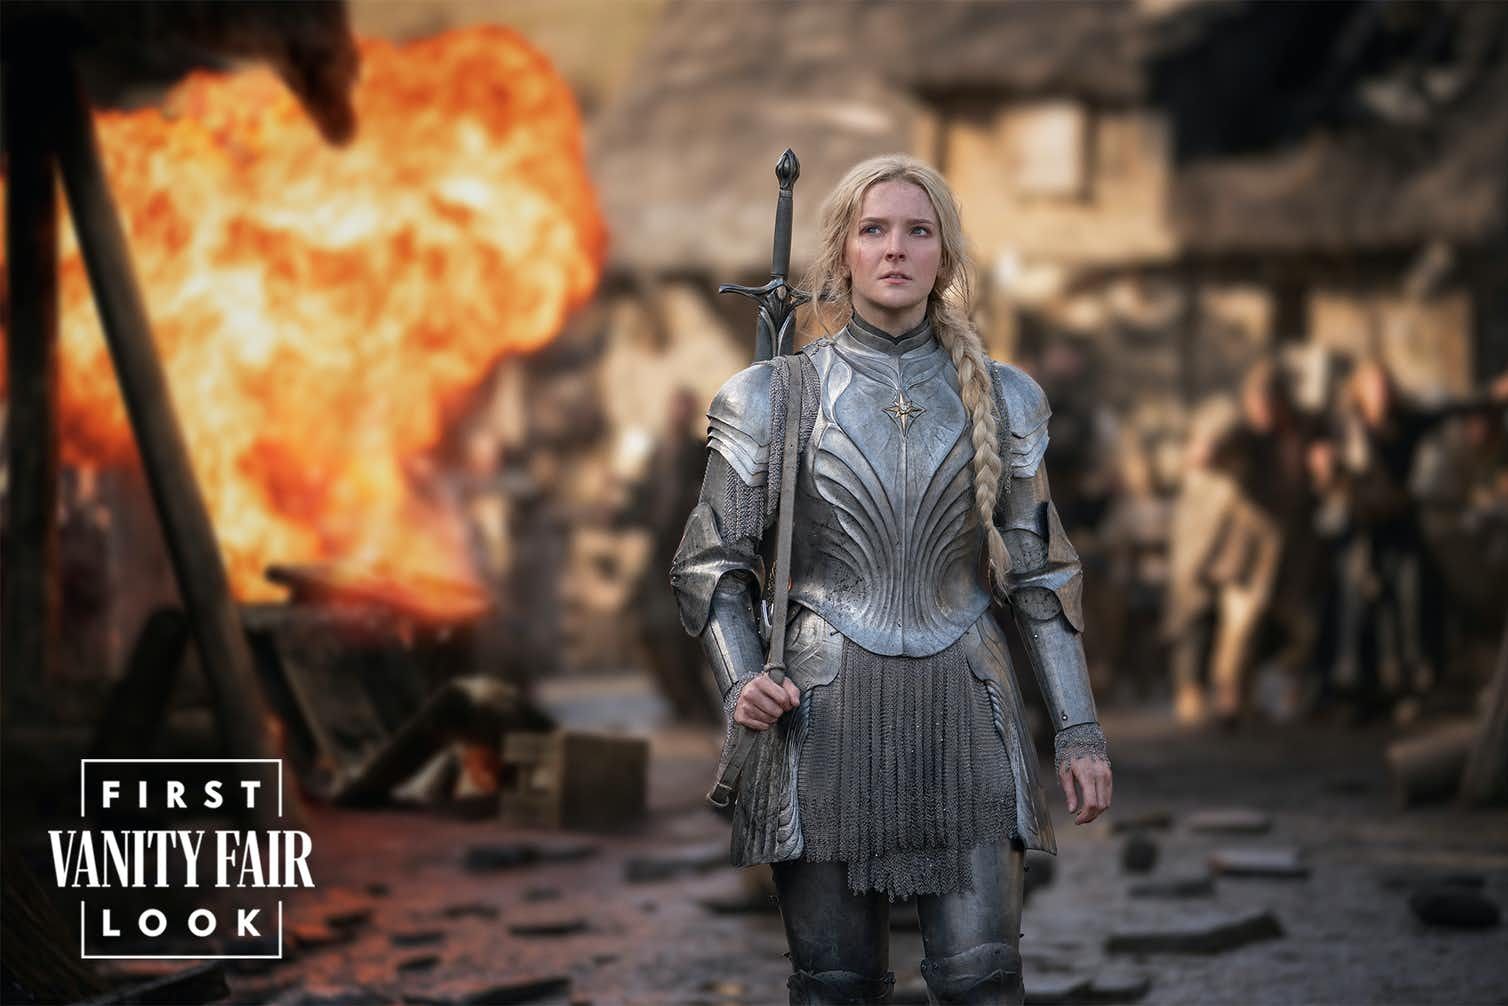 Galadriel played by Morfydd Clark in Amazon Studios Lord of the Rings prequel series is standing armoured on a dirty street in front of a house engulfed in flames